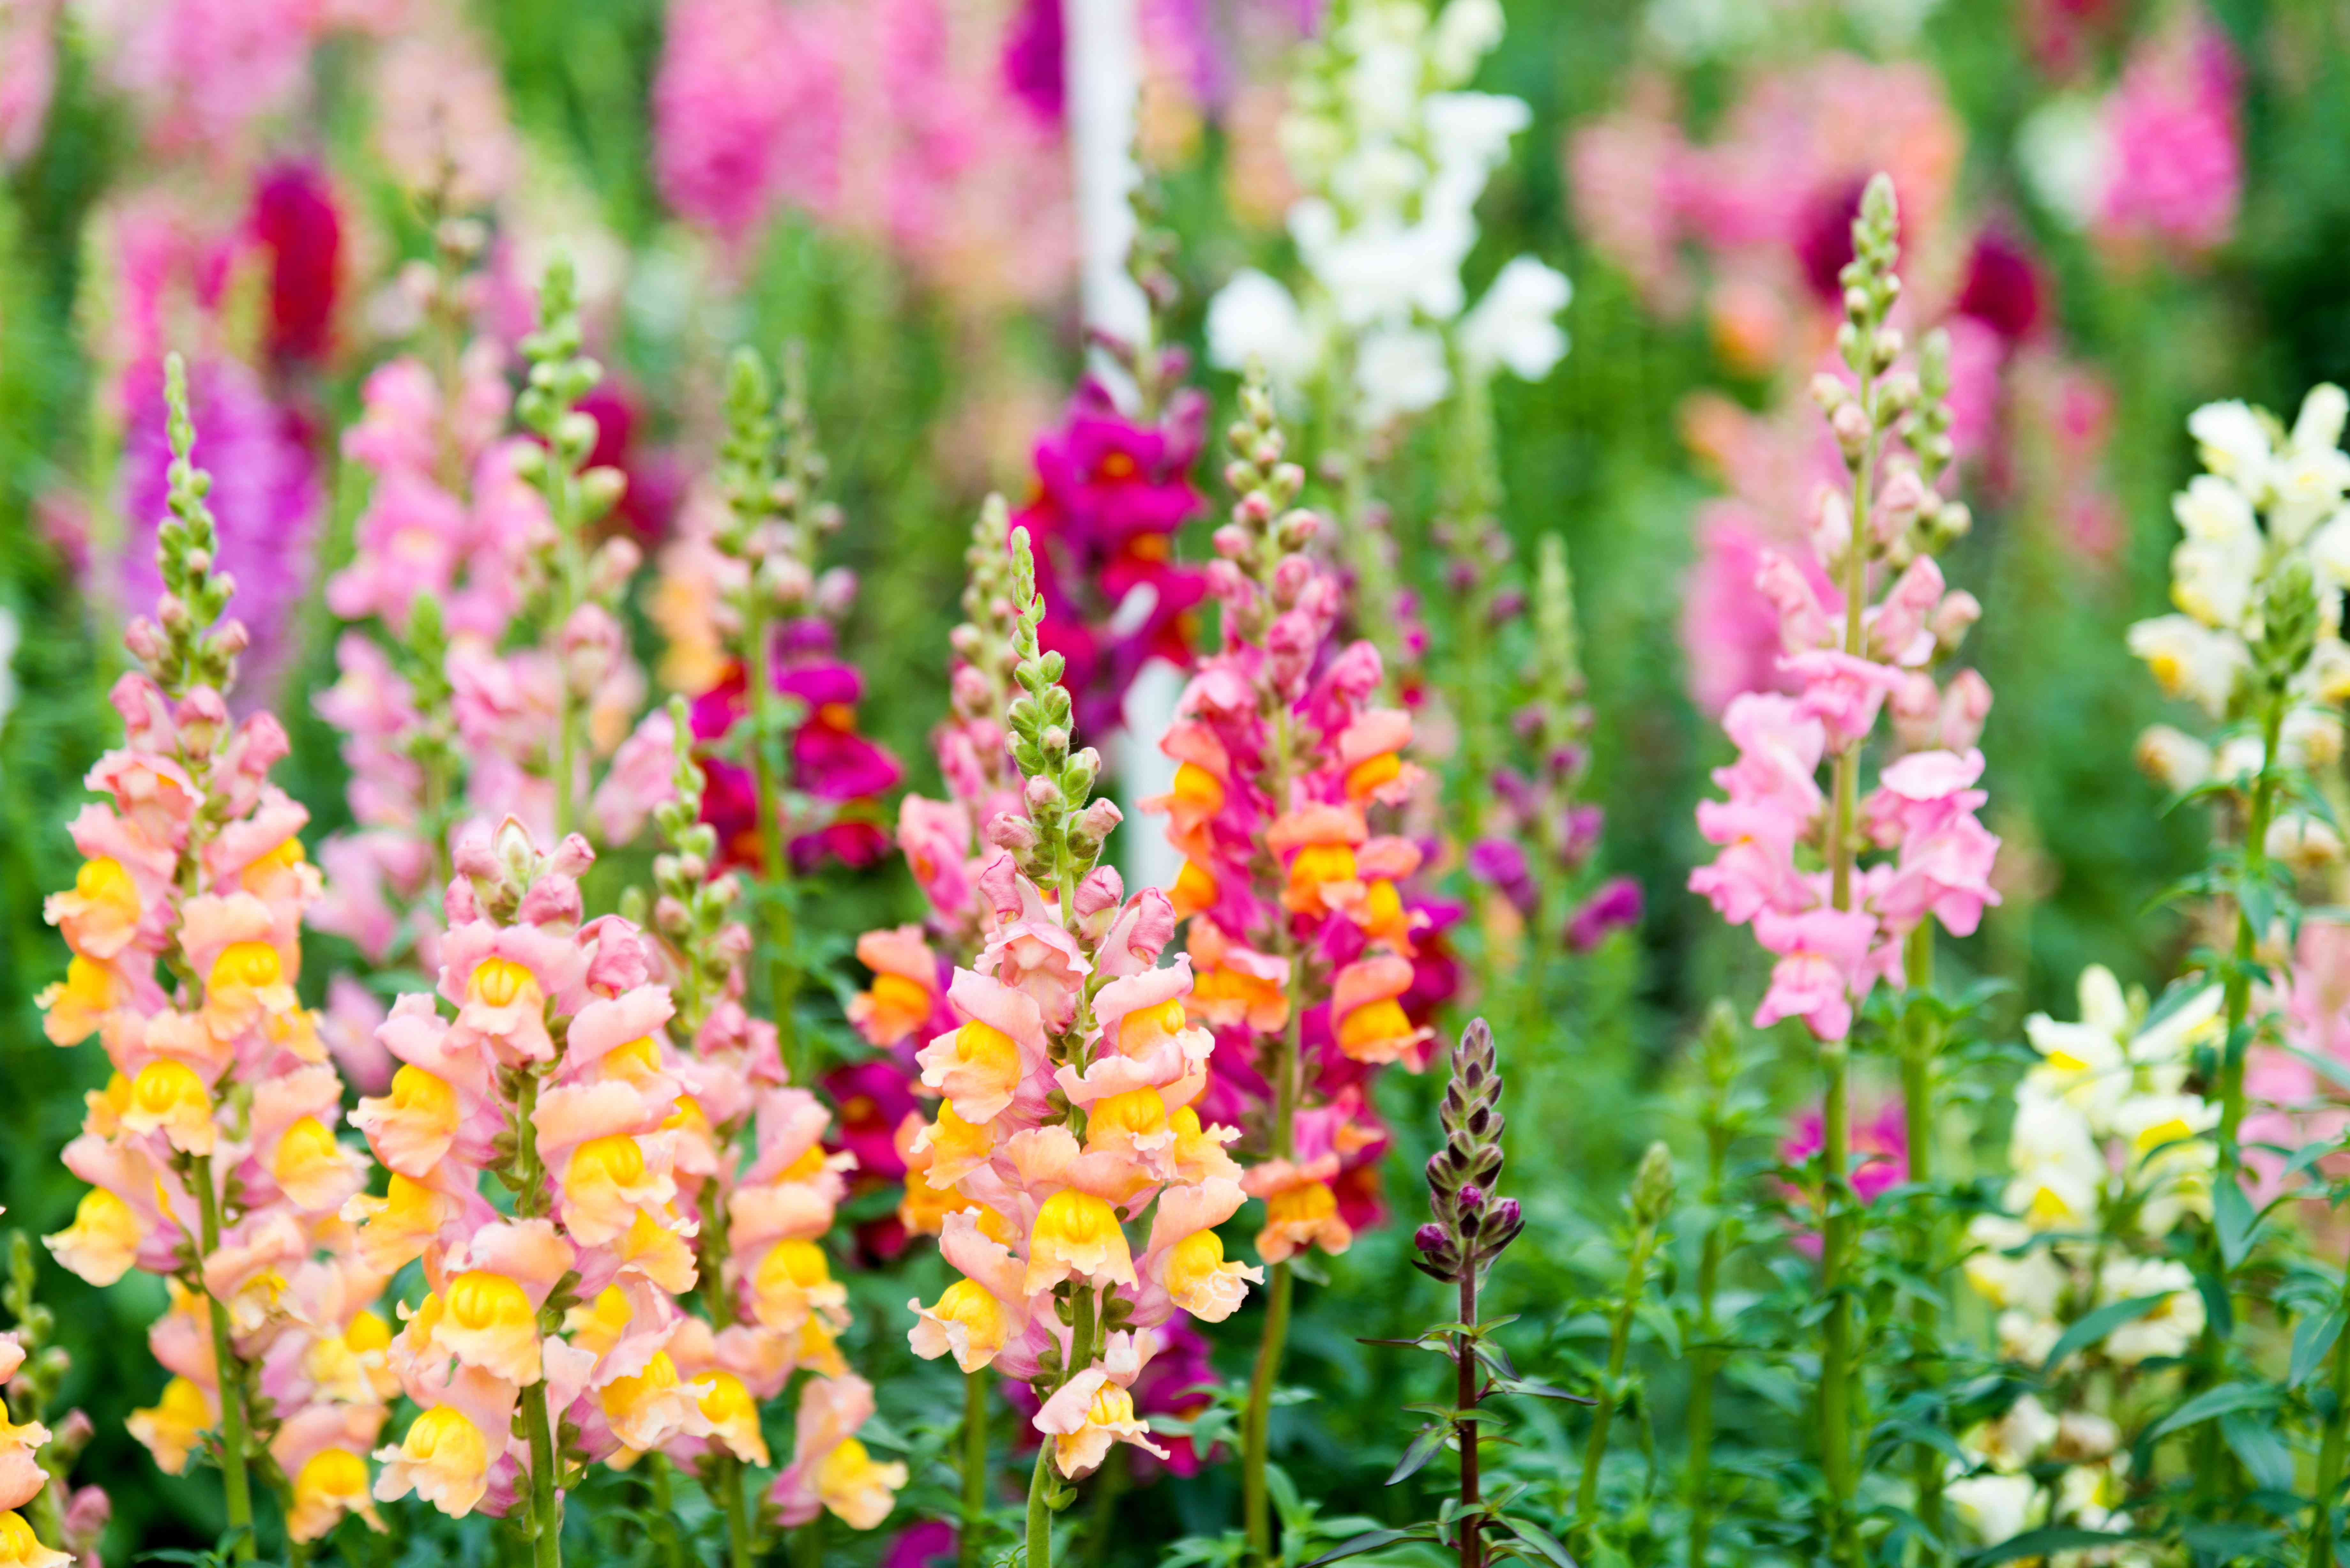 18 Self-Seeding Flowers That Produce New Blooms Every Year—With Less Work for You